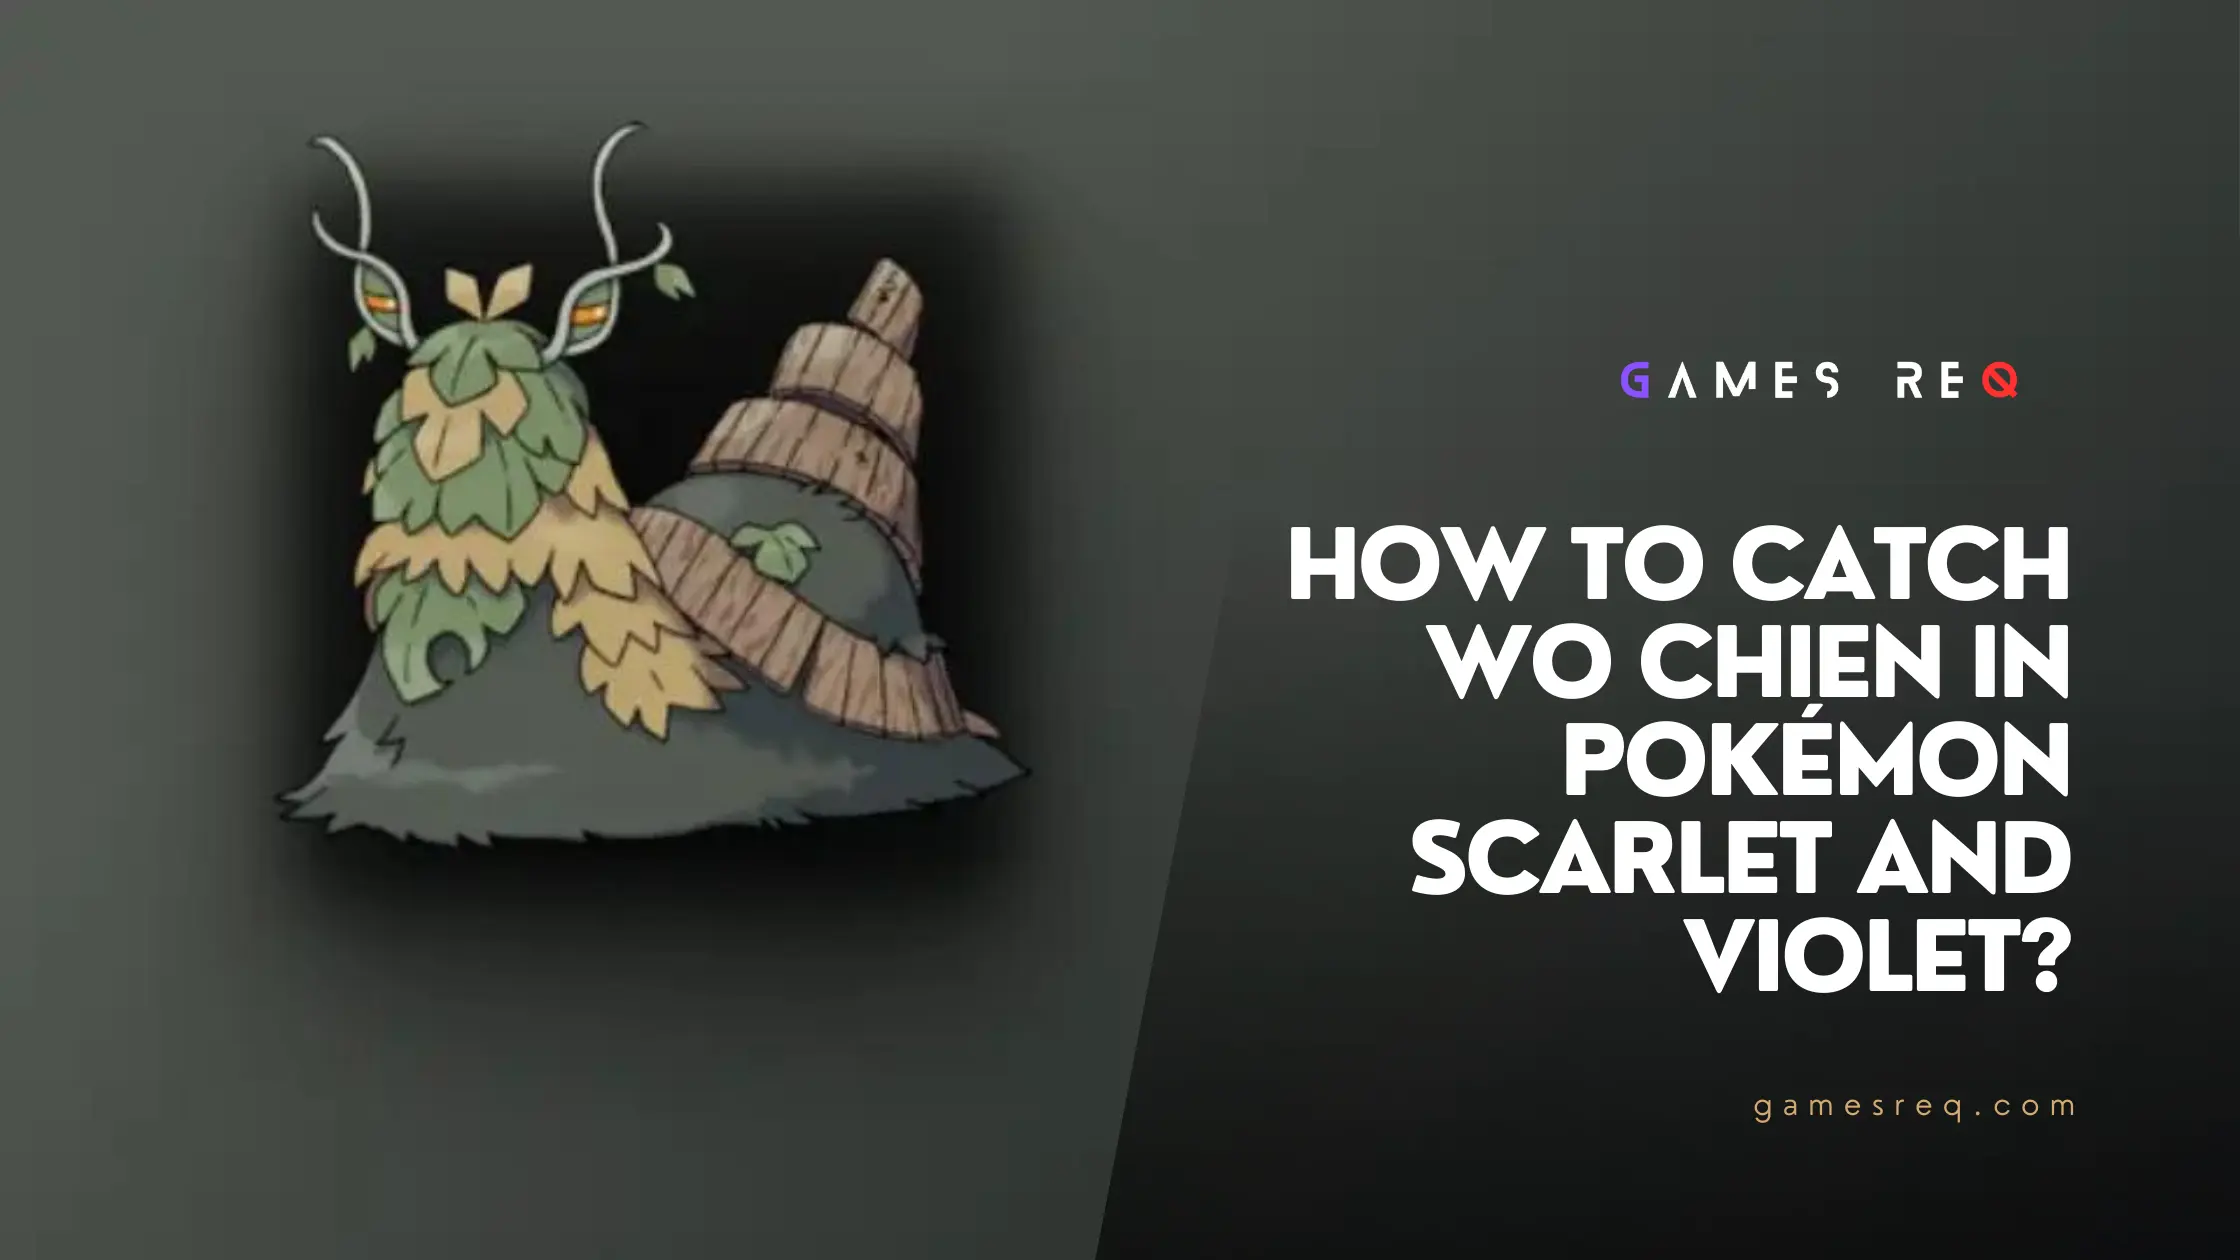 How to Catch Wo Chien in Pokémon Scarlet and Violet